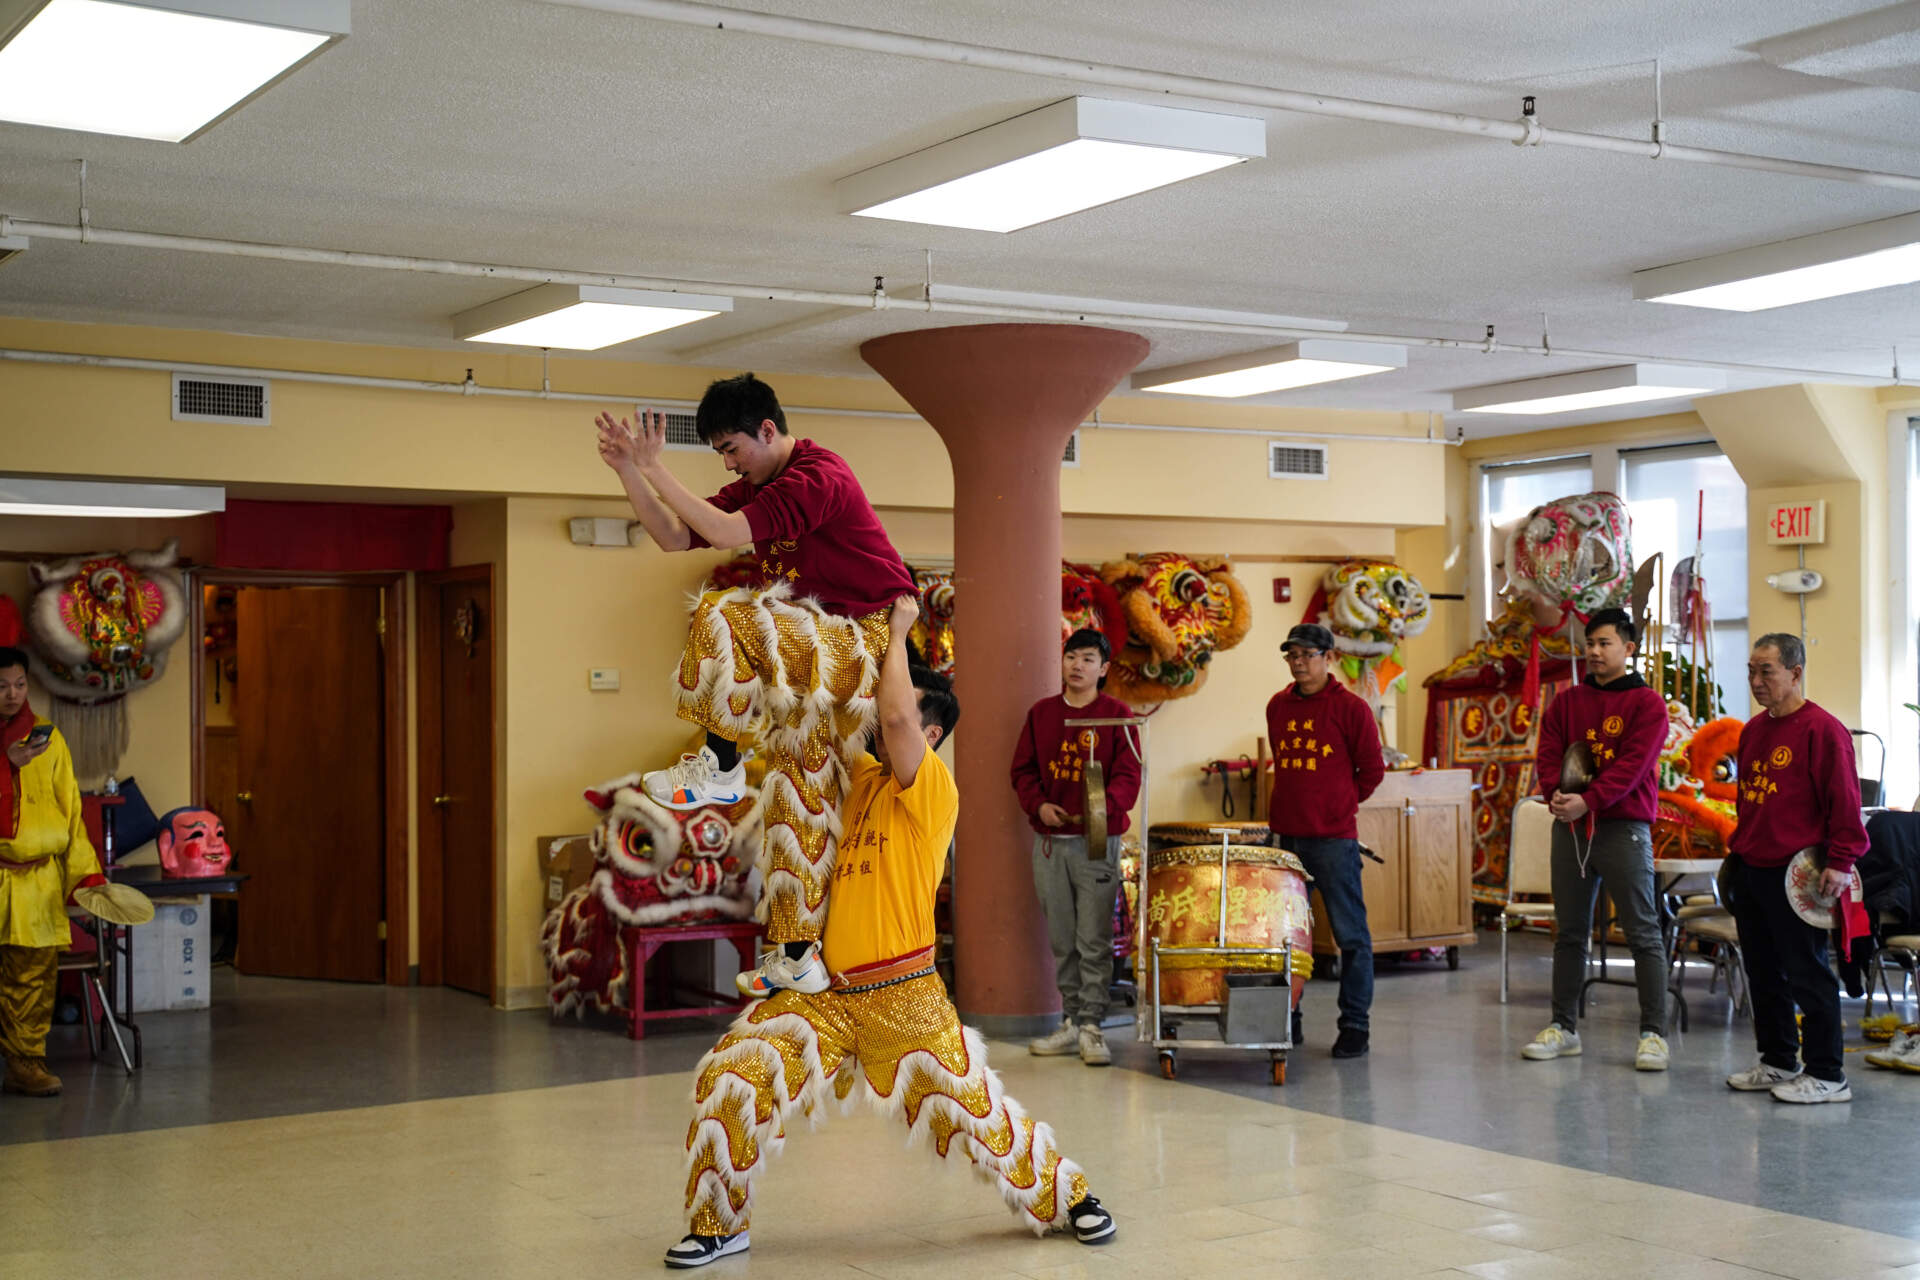 In the Boston Wong Family Benevolent Association space, Lucas Wang practices lifting Henry Chen. (Cici Yu/ WBUR)